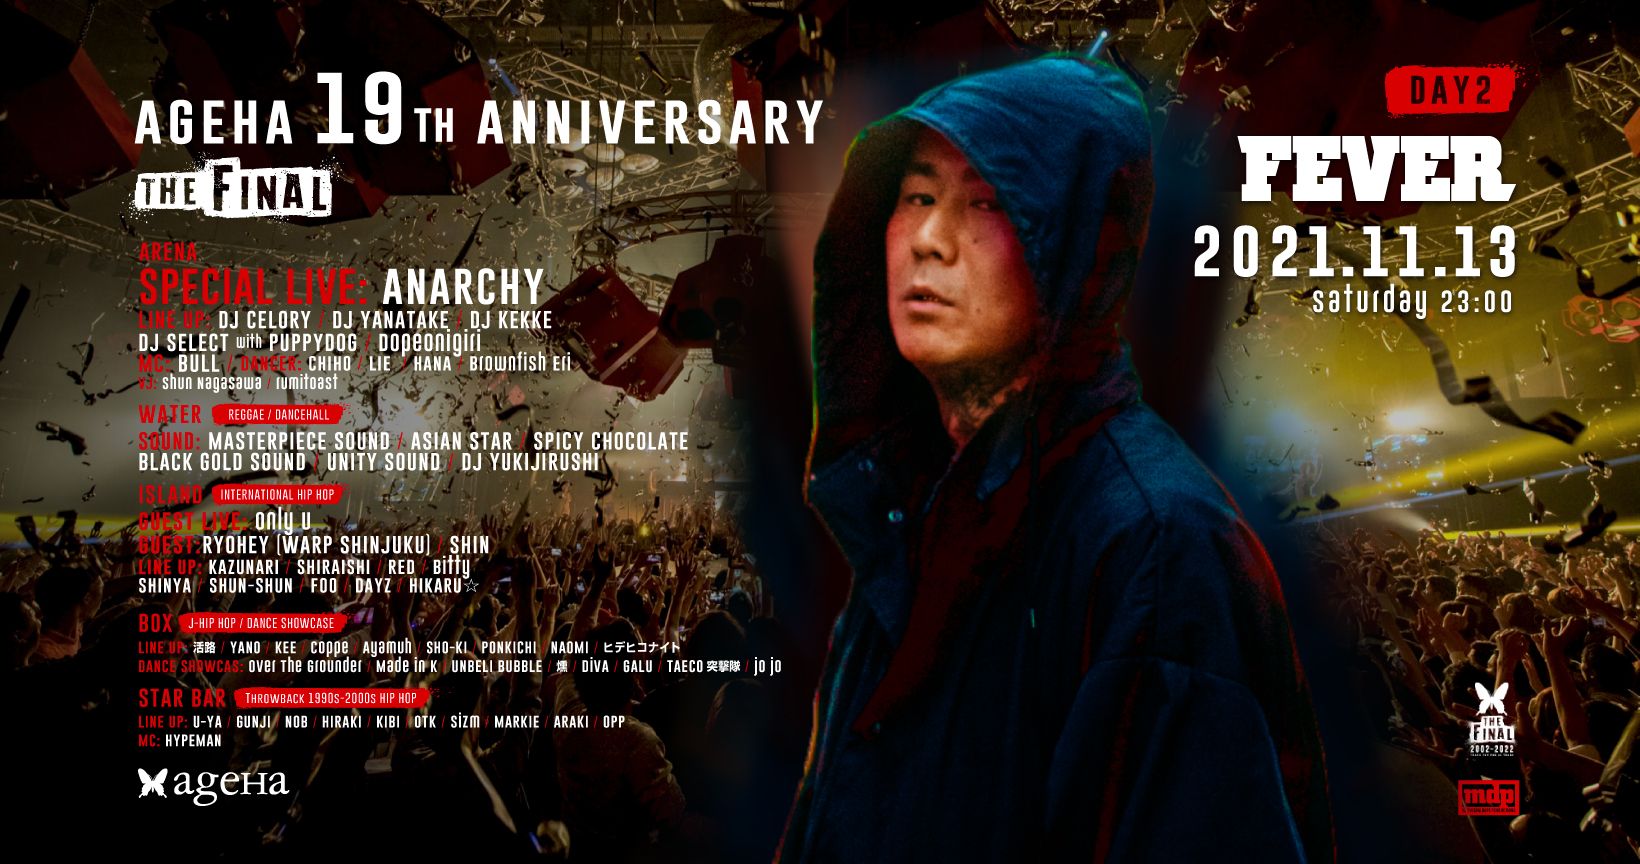 ageHa 19th Anniversary “THE FINAL” DAY-2 "FEVER"